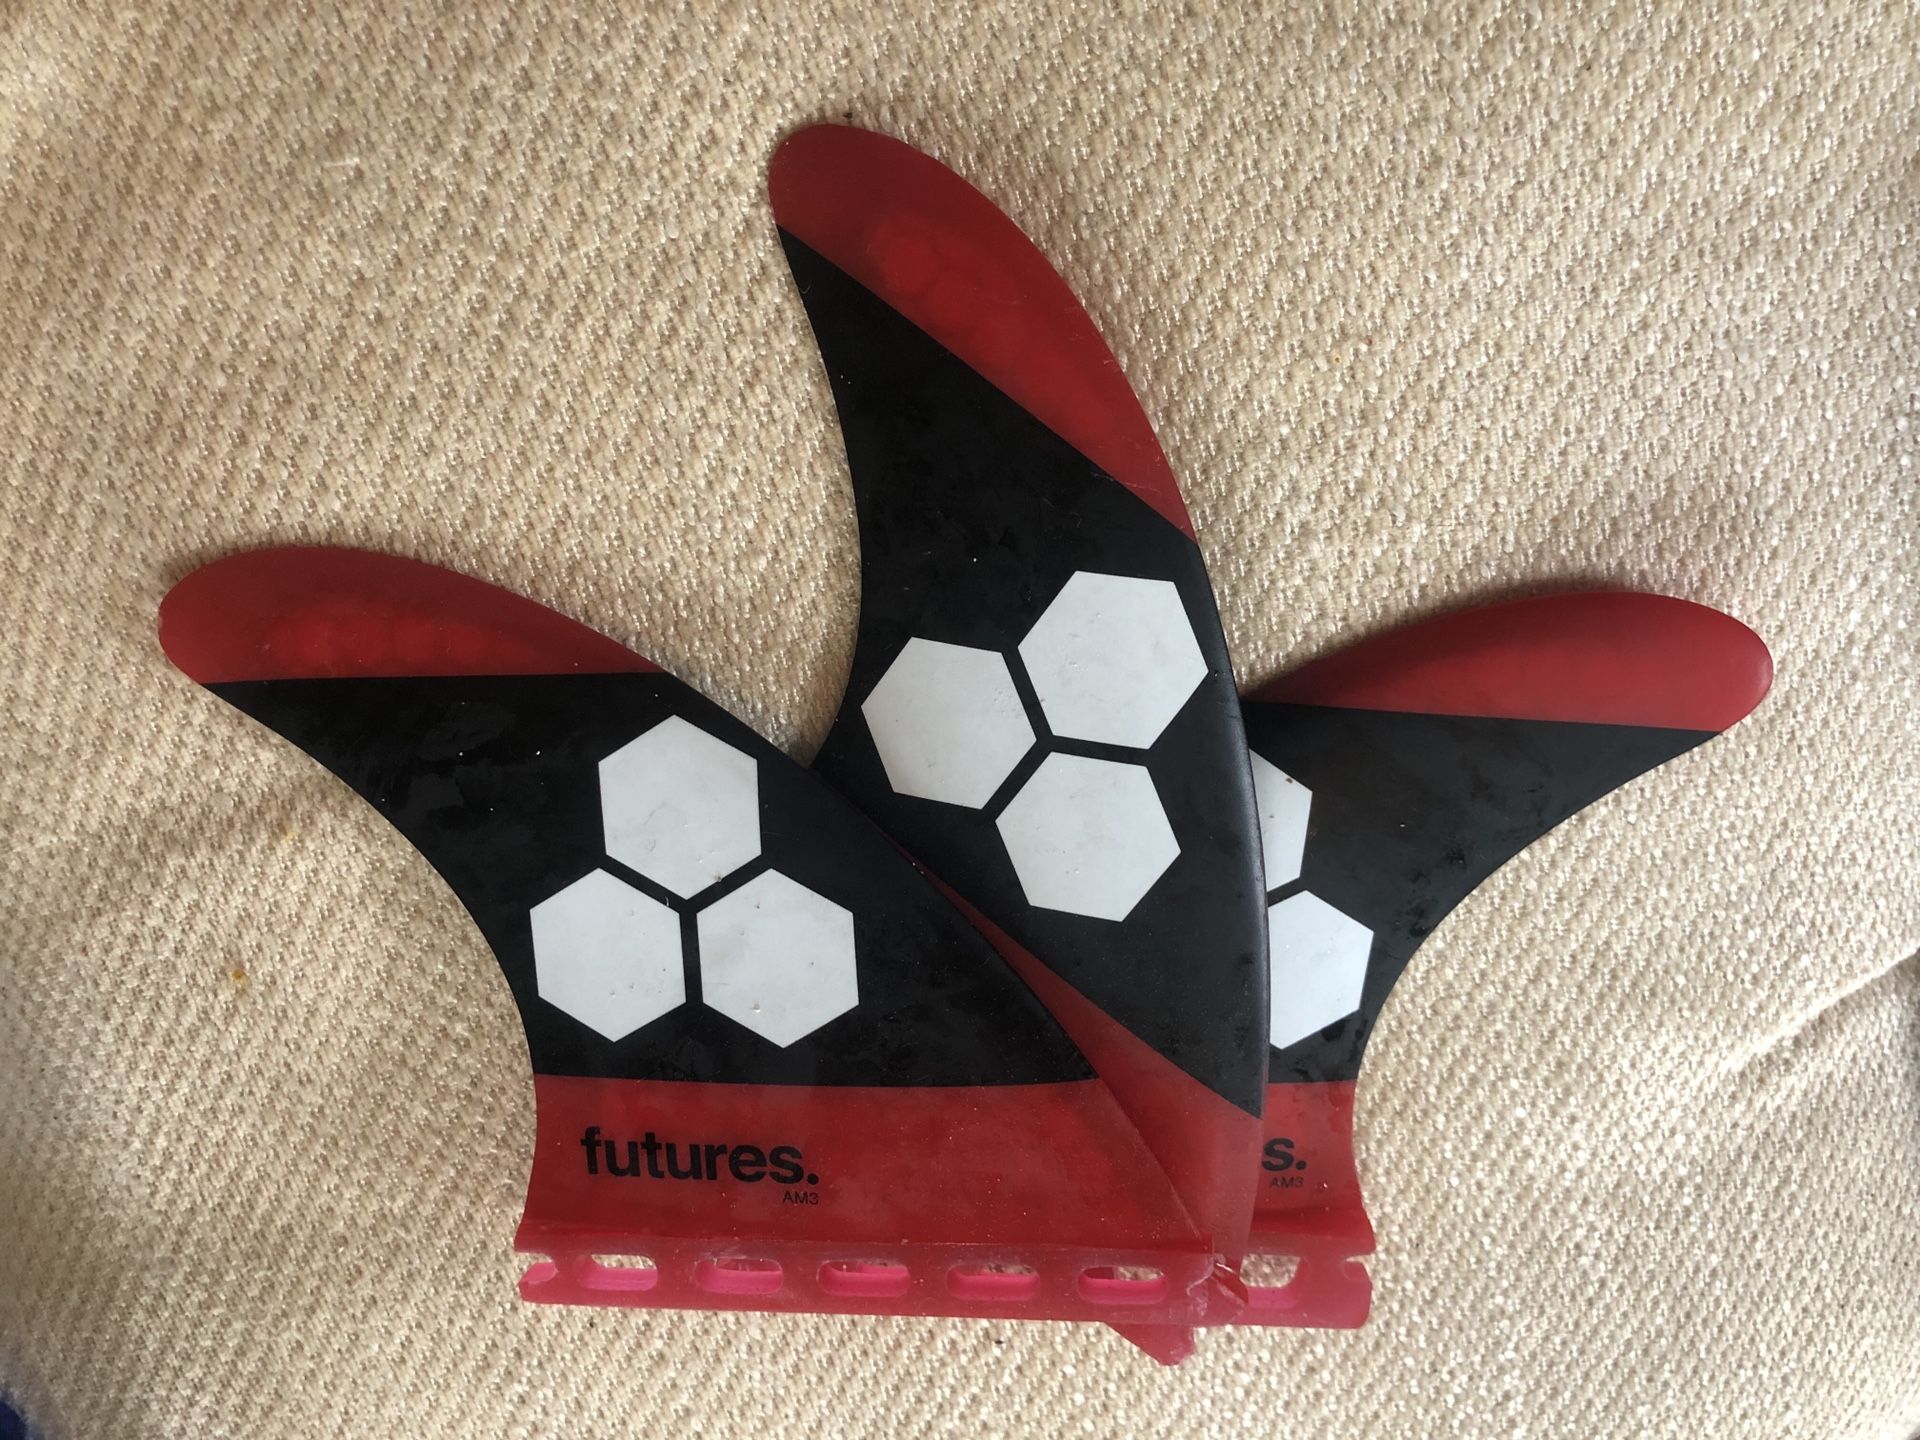 Futures AM3 Surfboard tri fins size small